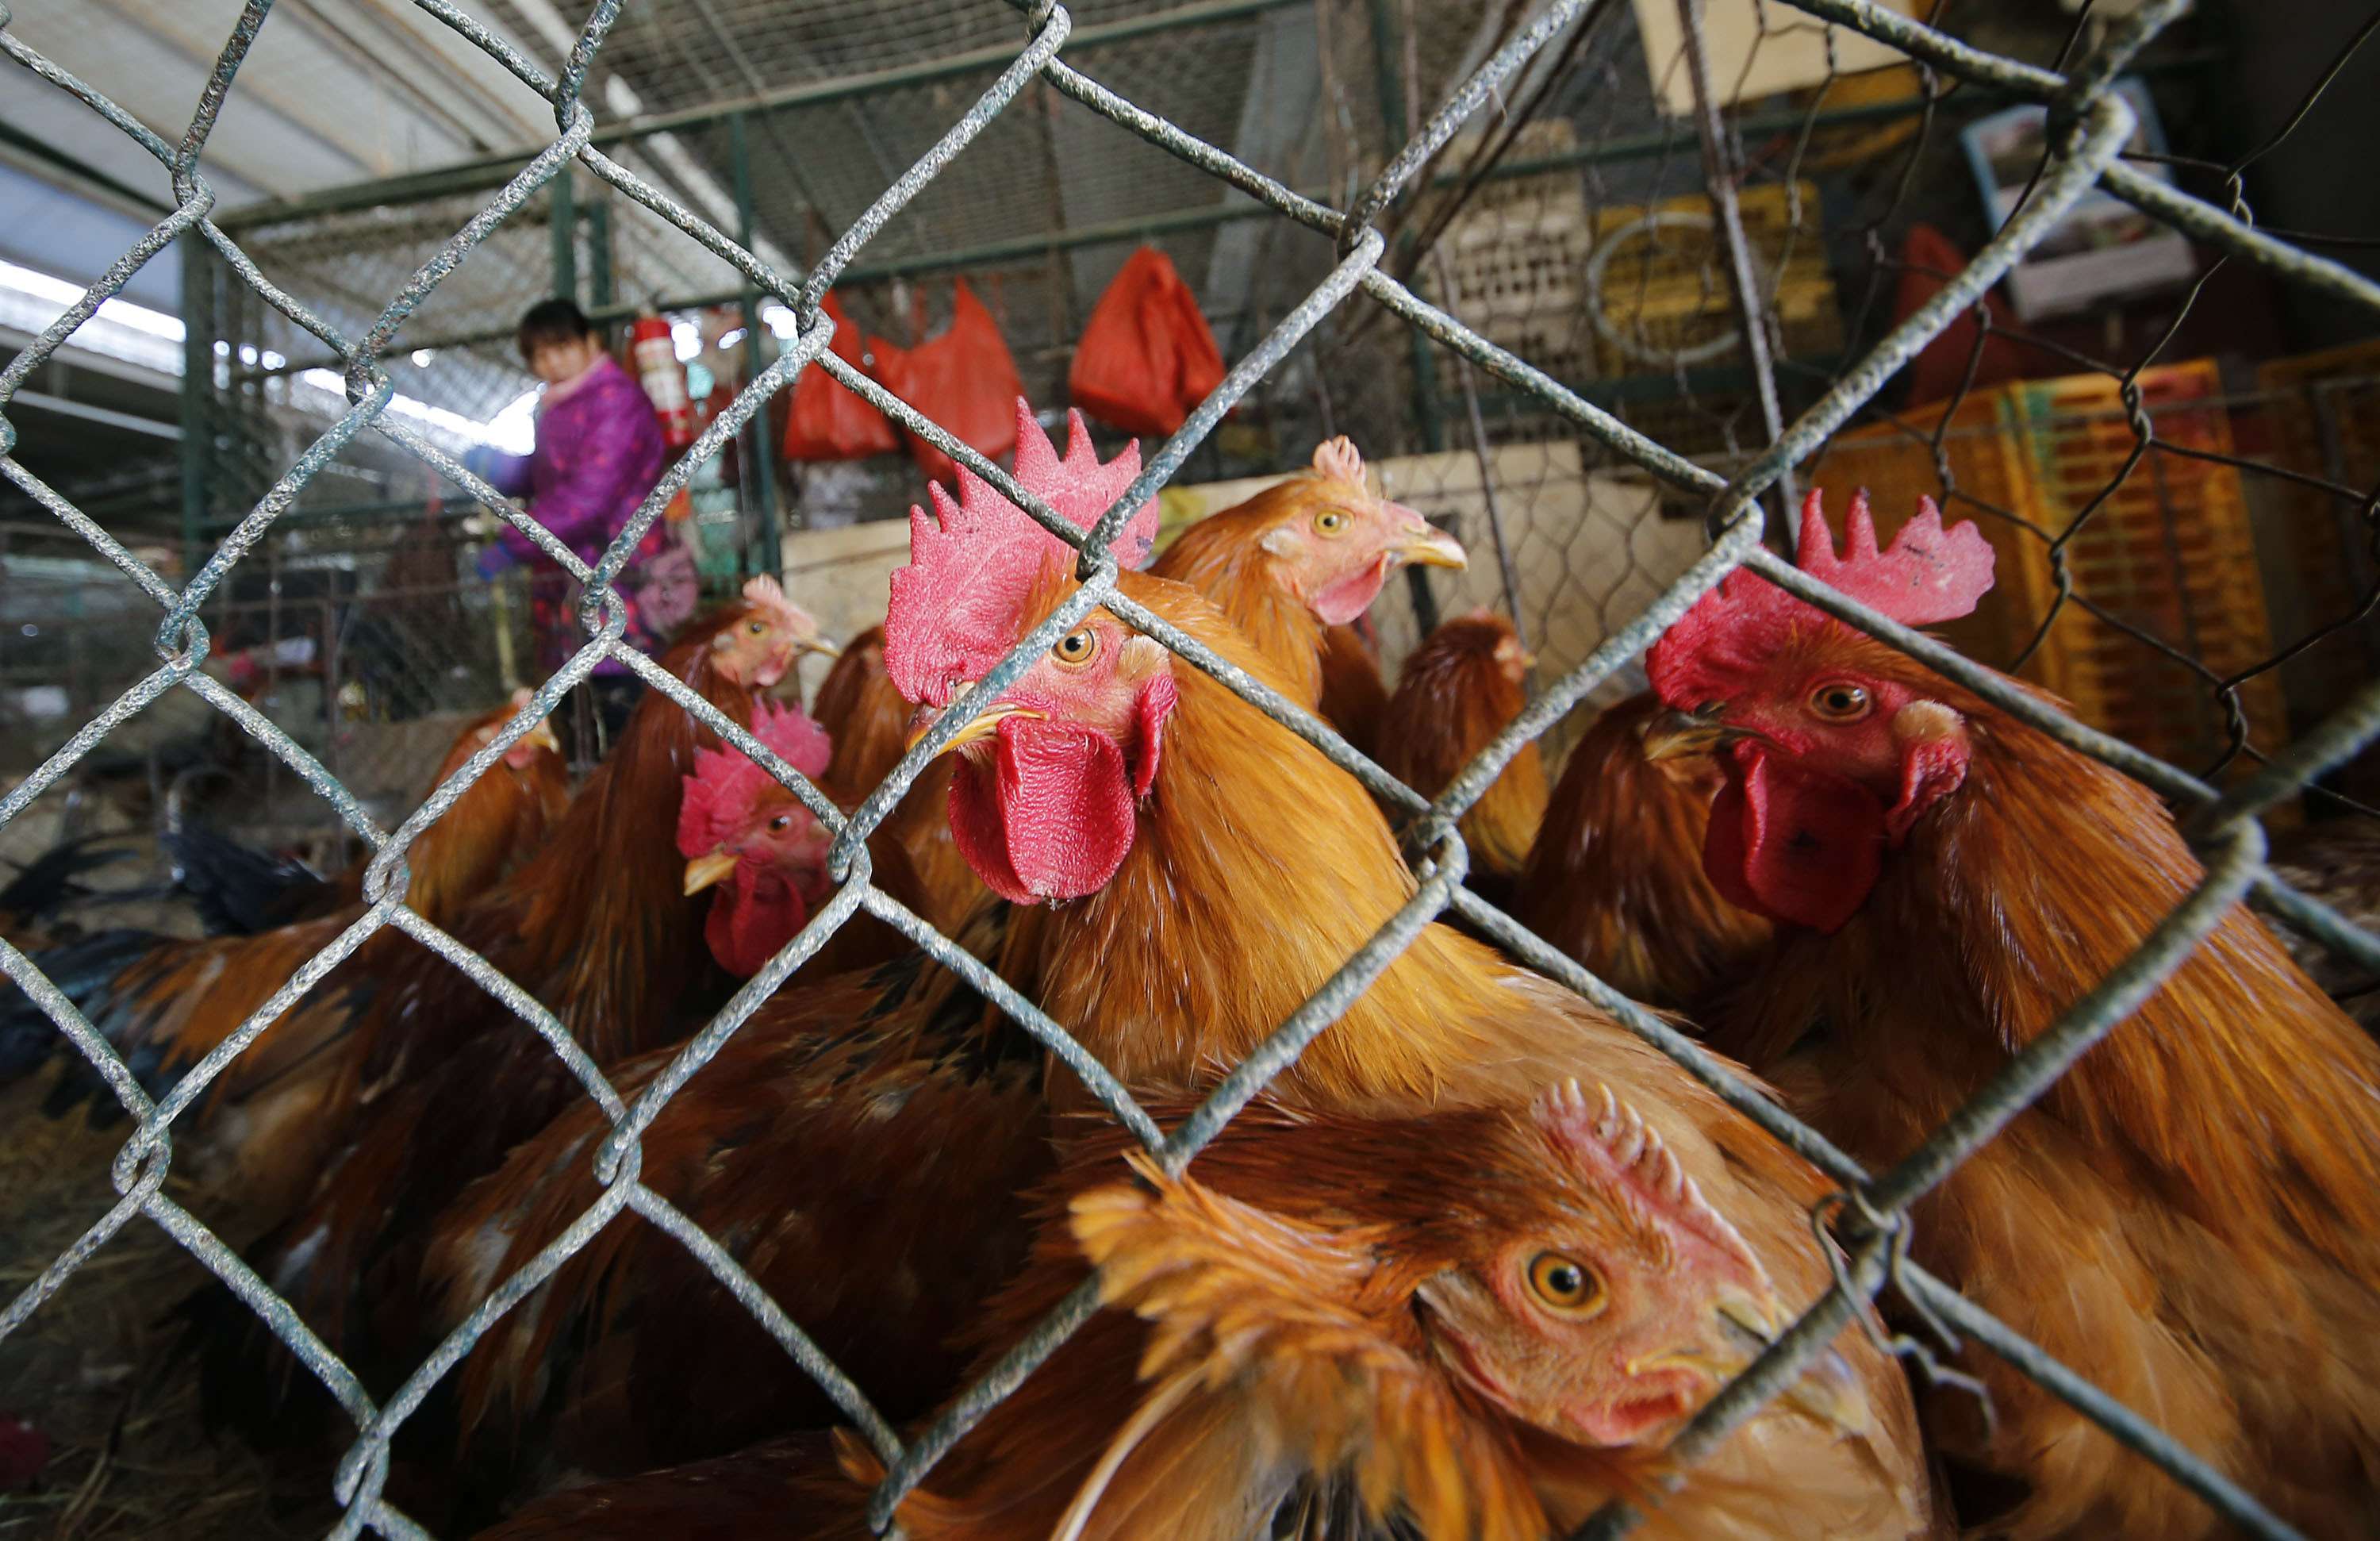 The live poultry trade has been temporarily halted in the cities of Guangzhou in the south, Changsha in central China, and the entire eastern province of Zhejiang, among other areas. Photo: AP